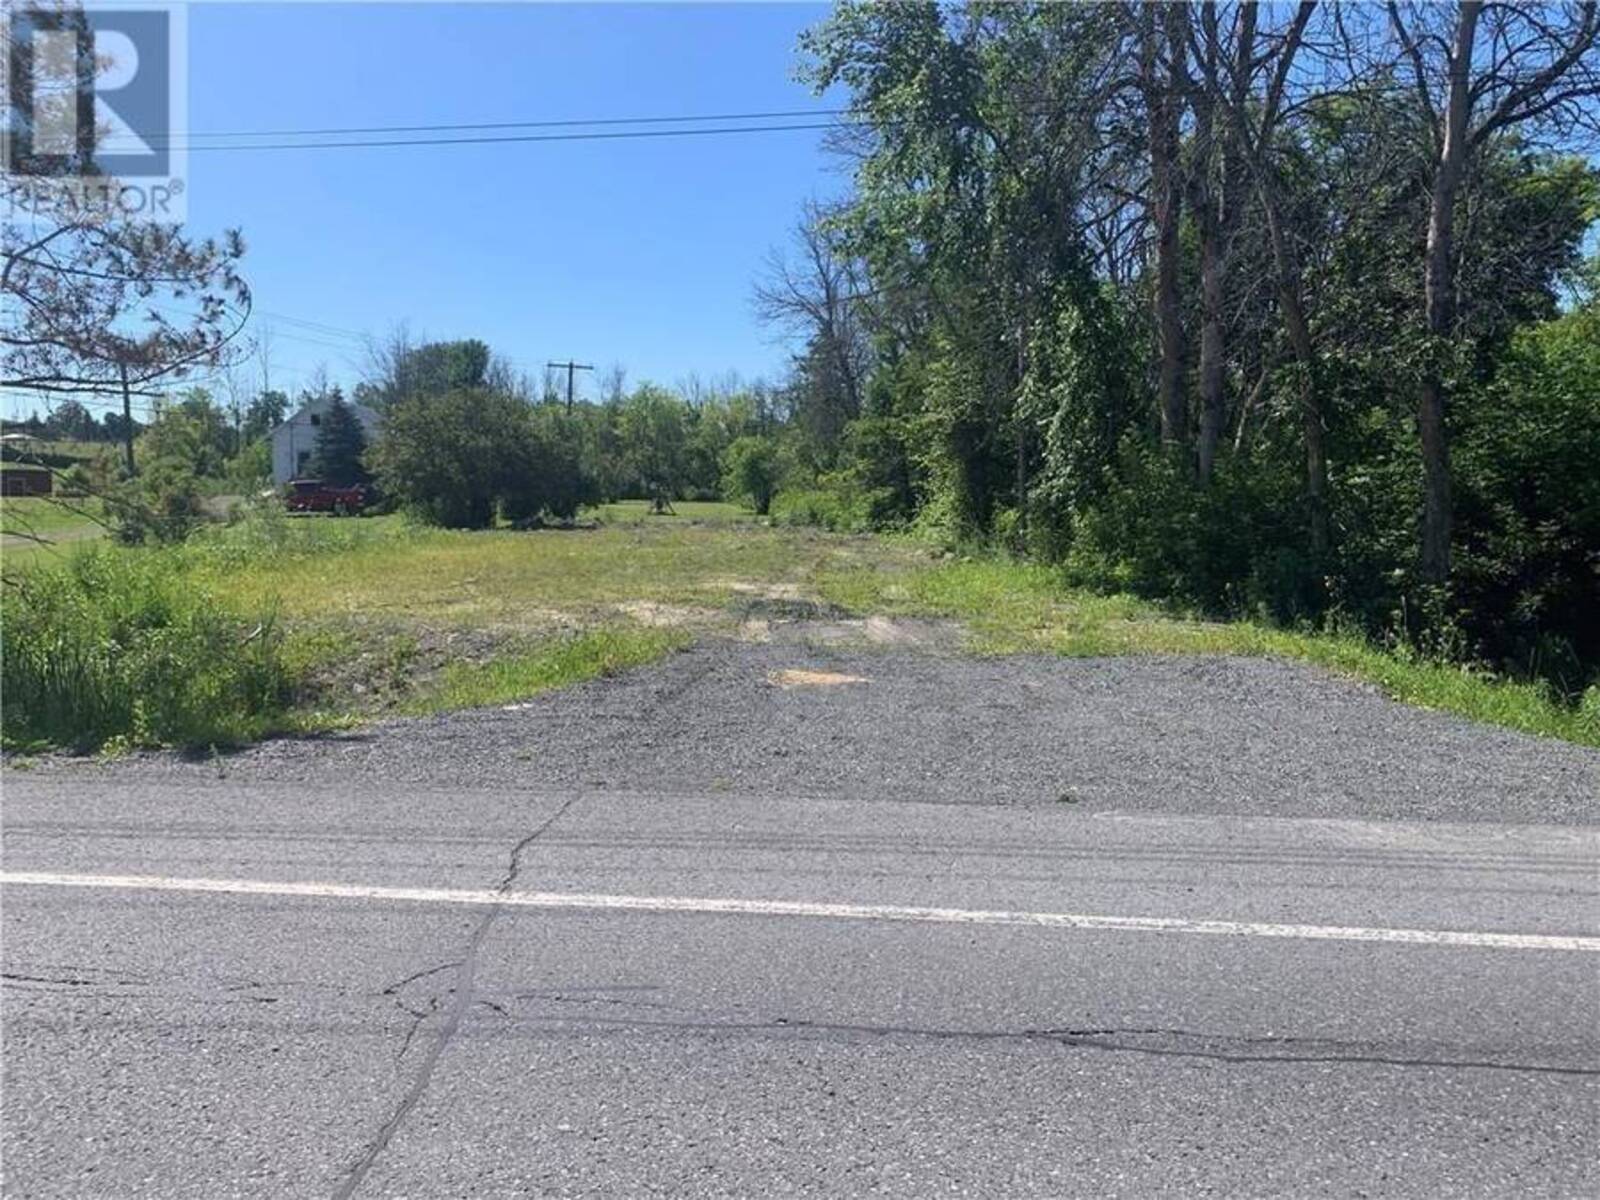 000 COUNTY RD 18 ROAD, St. Andrews West, Ontario K0C 1A0